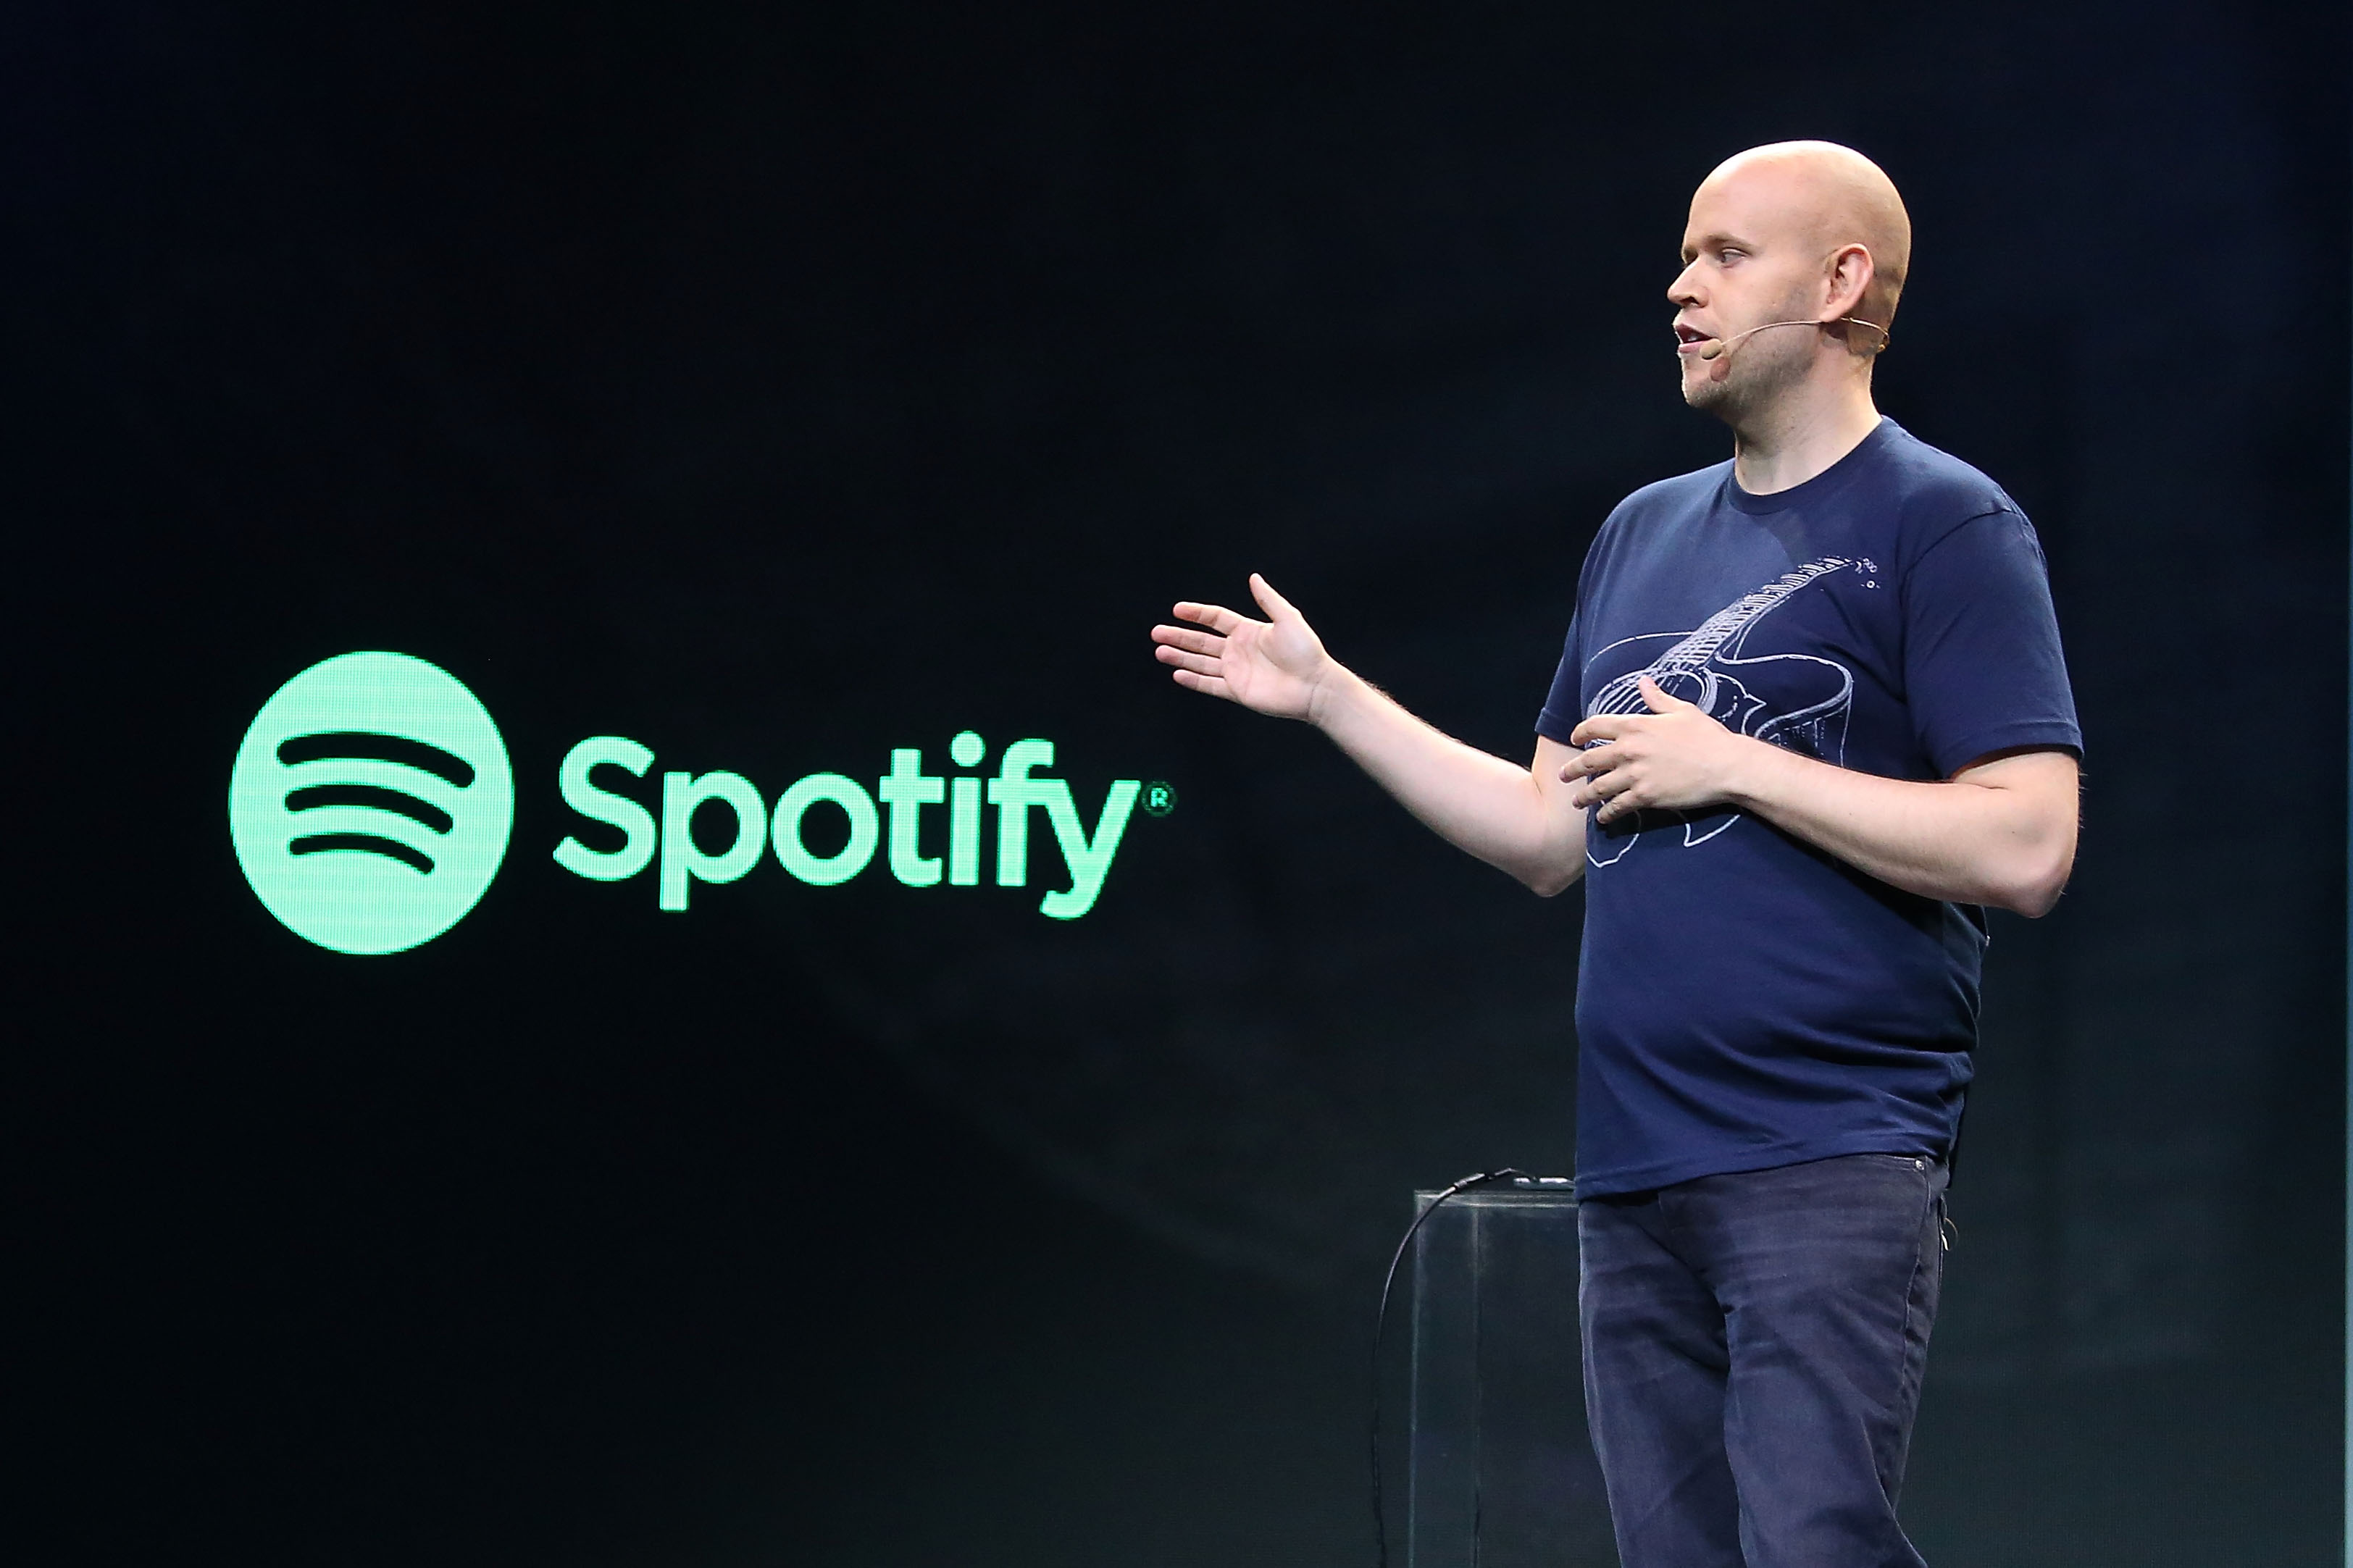 Spotify founder Daniel Ek speaks during the Spotify New Platform Launch at S.I.R. Studios on May 20, 2015 in New York City. (Taylor Hill&mdash;FilmMagic)